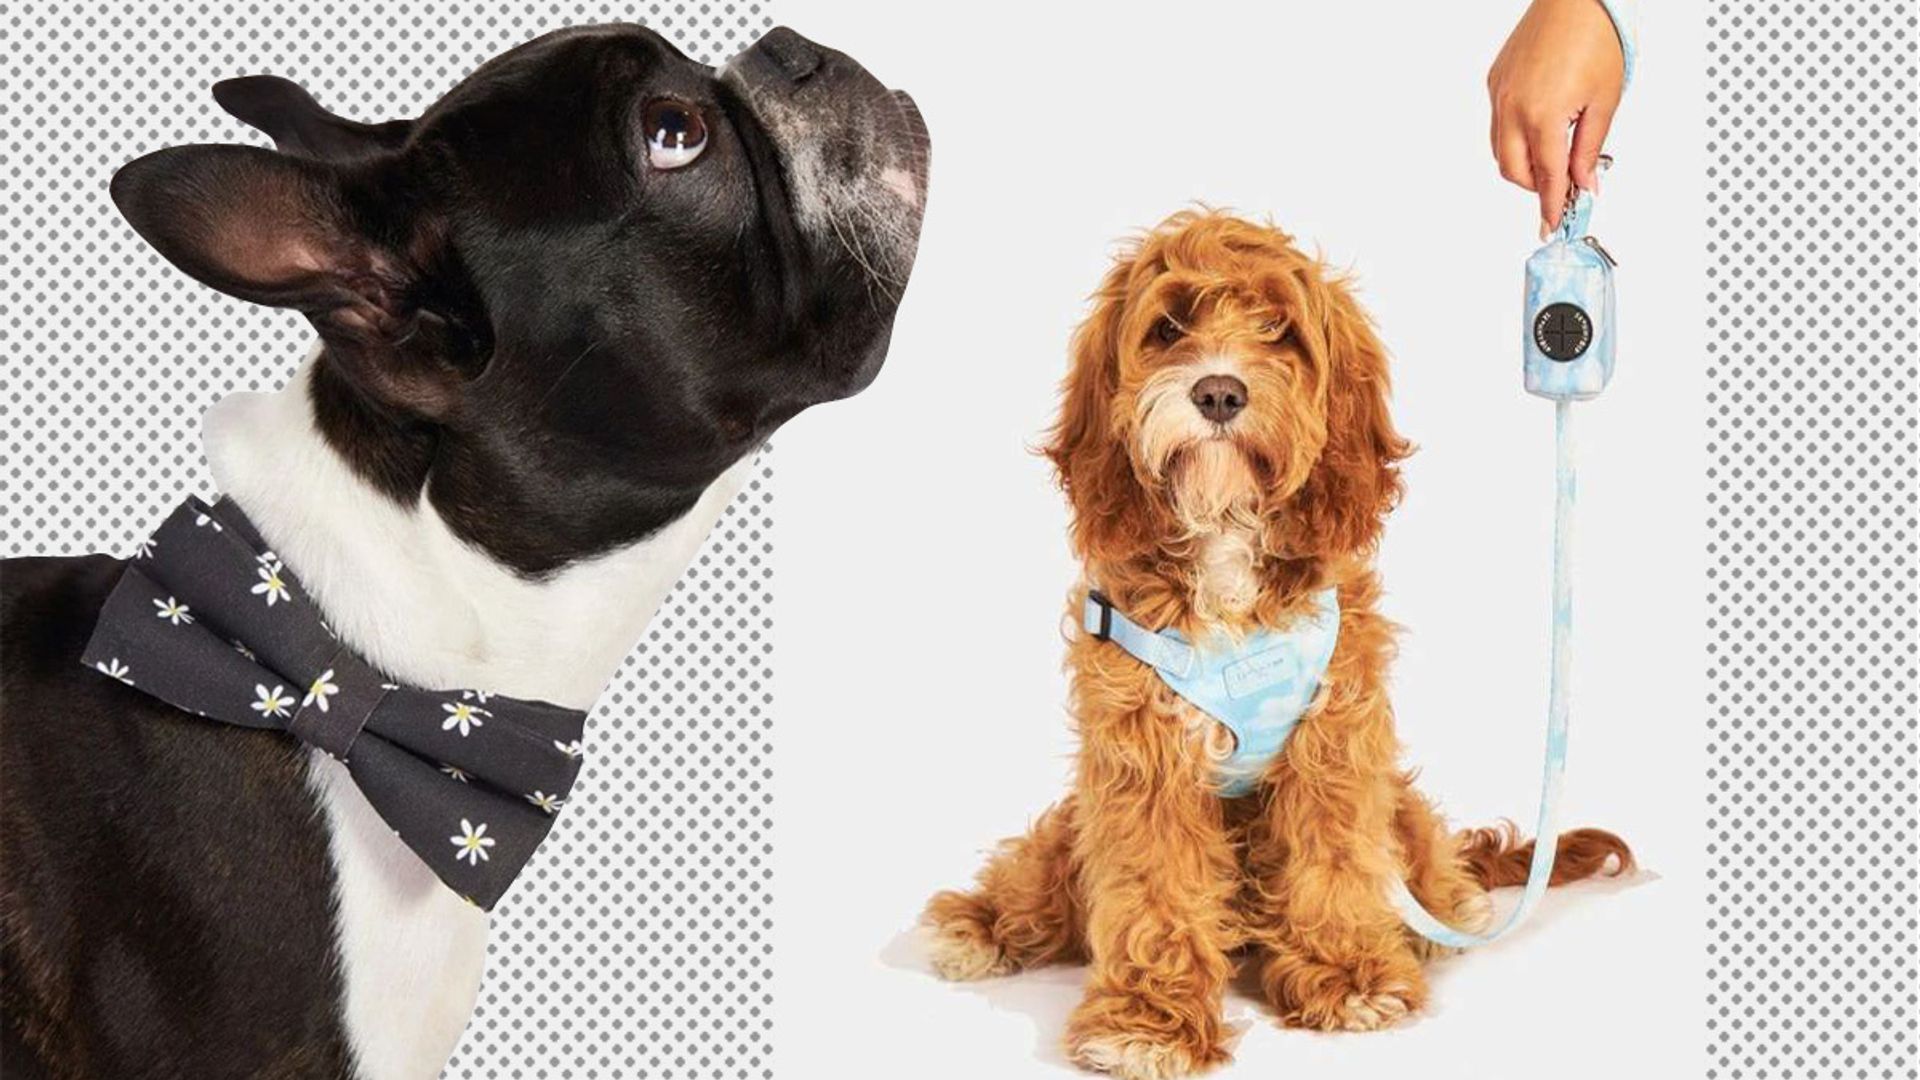 Skinnydip’s pet accessories collection is purrfect for your furry friend